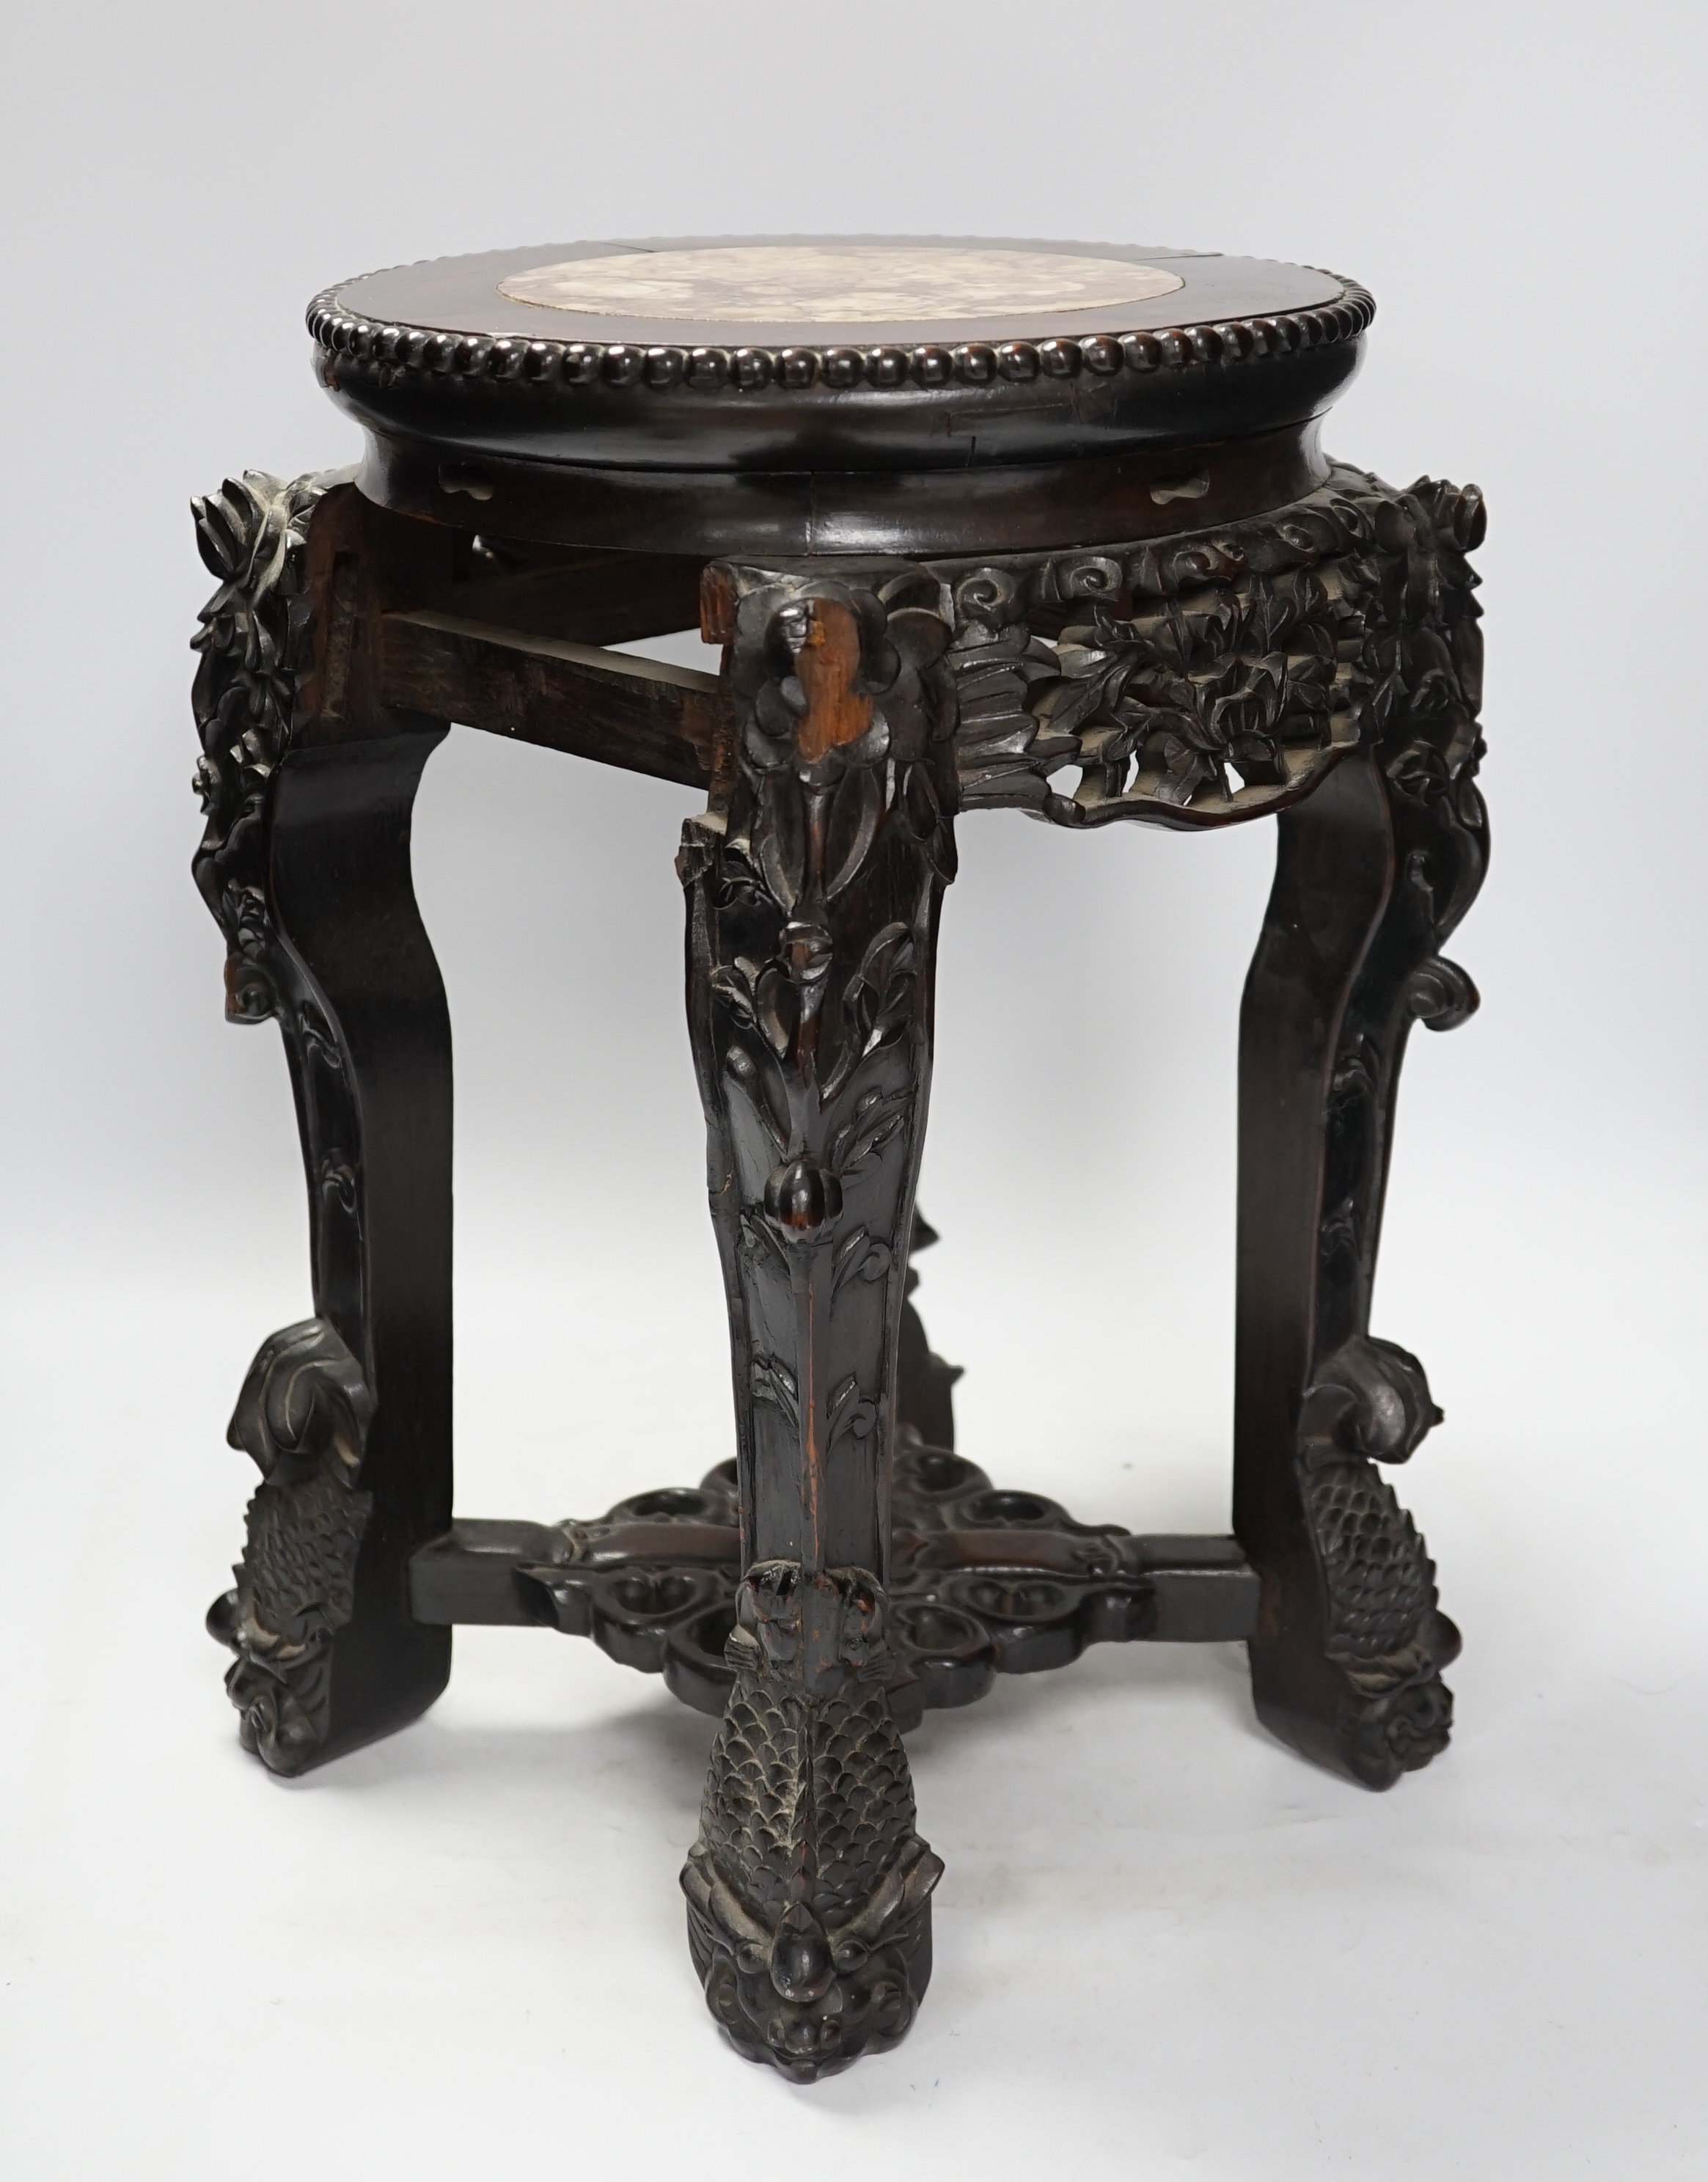 A Chinese hongmu stand, with inset marble top, 42cm high. Condition - poor to fair, section of frieze missing